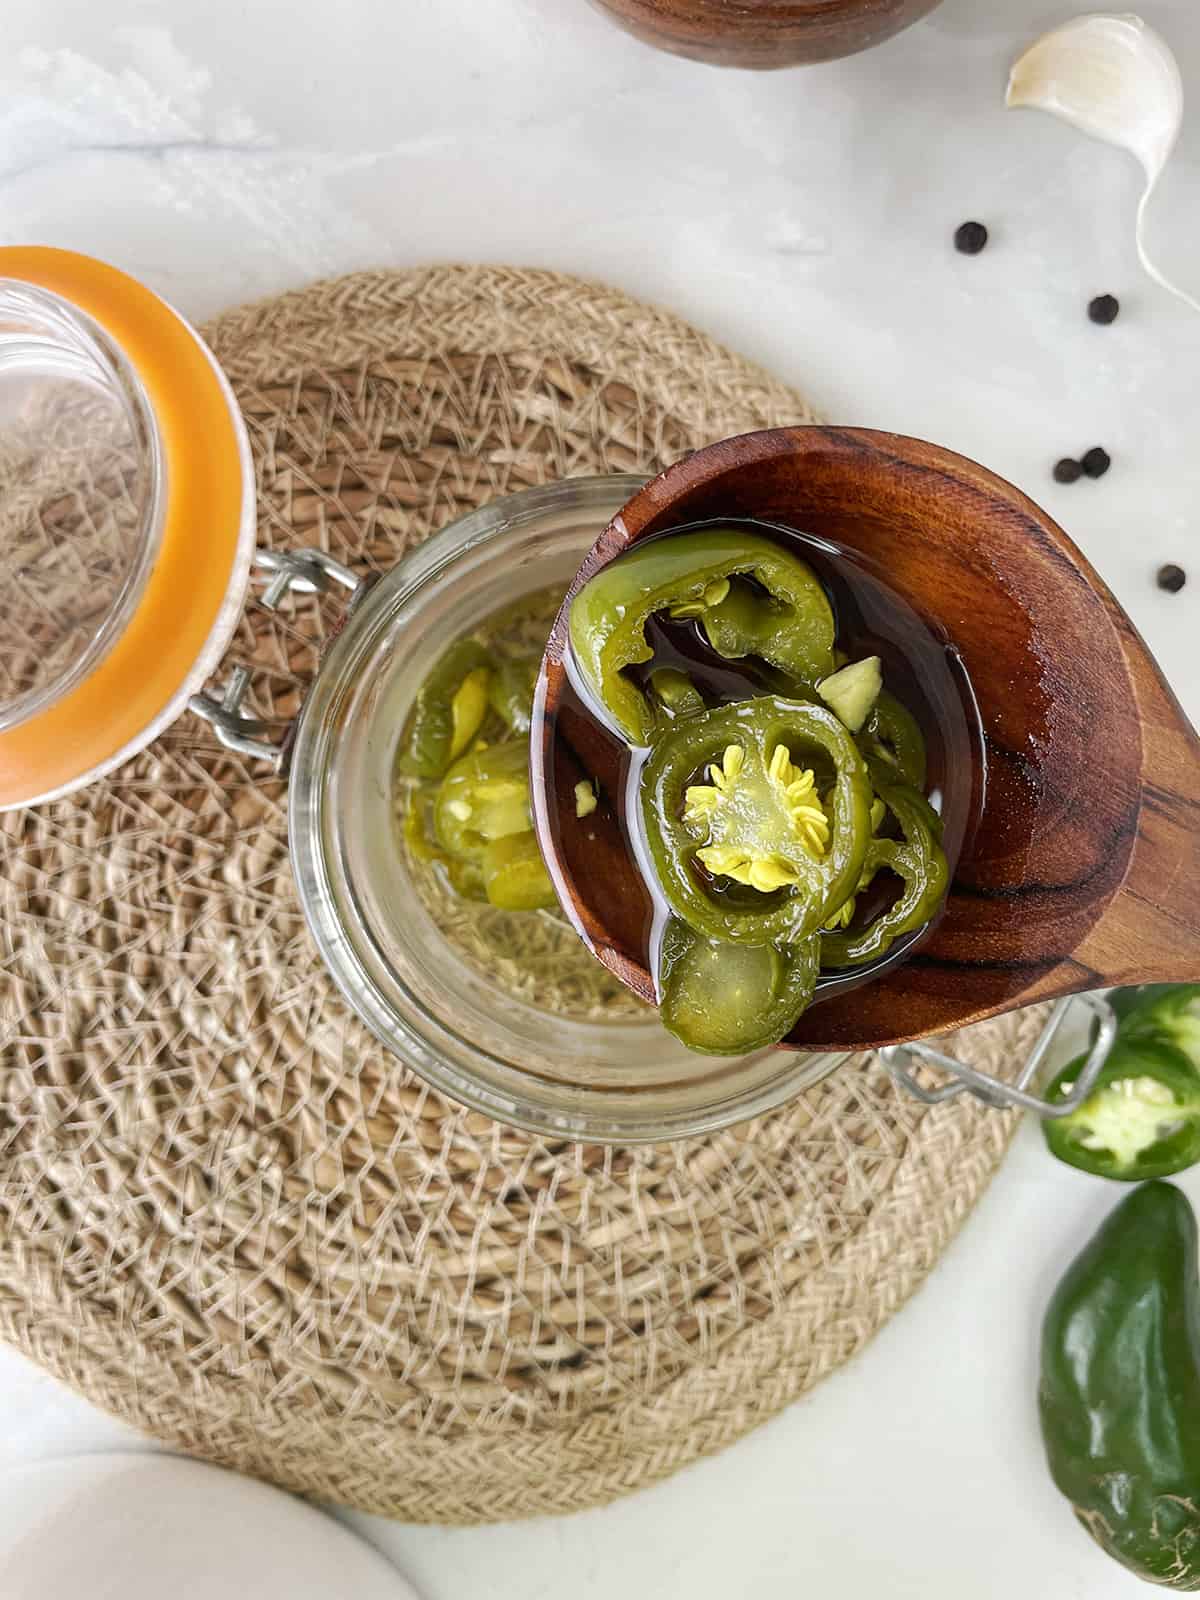 A wooden spoon removing pickled jalapenos from a glass jar.